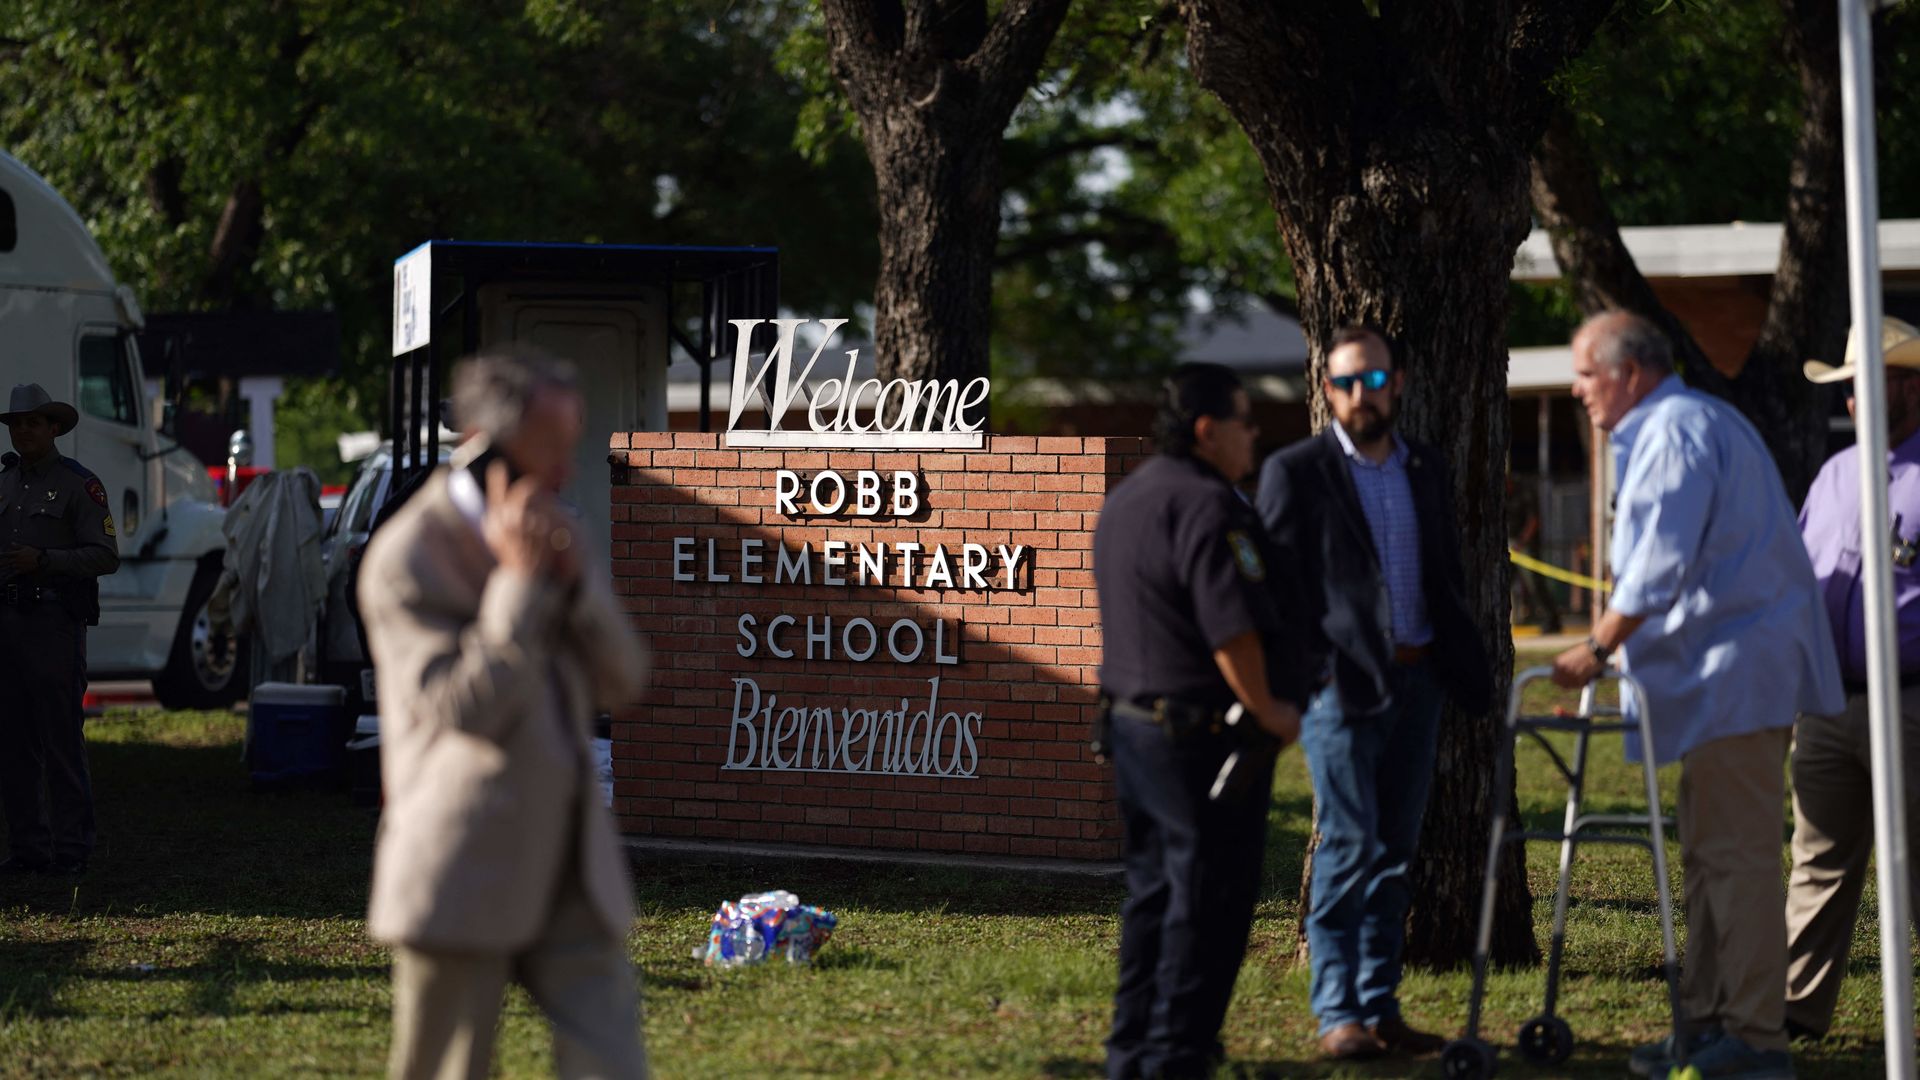 Photo of a brick sign that says "Welcome to Robb Elementary School. Bienvenidos"